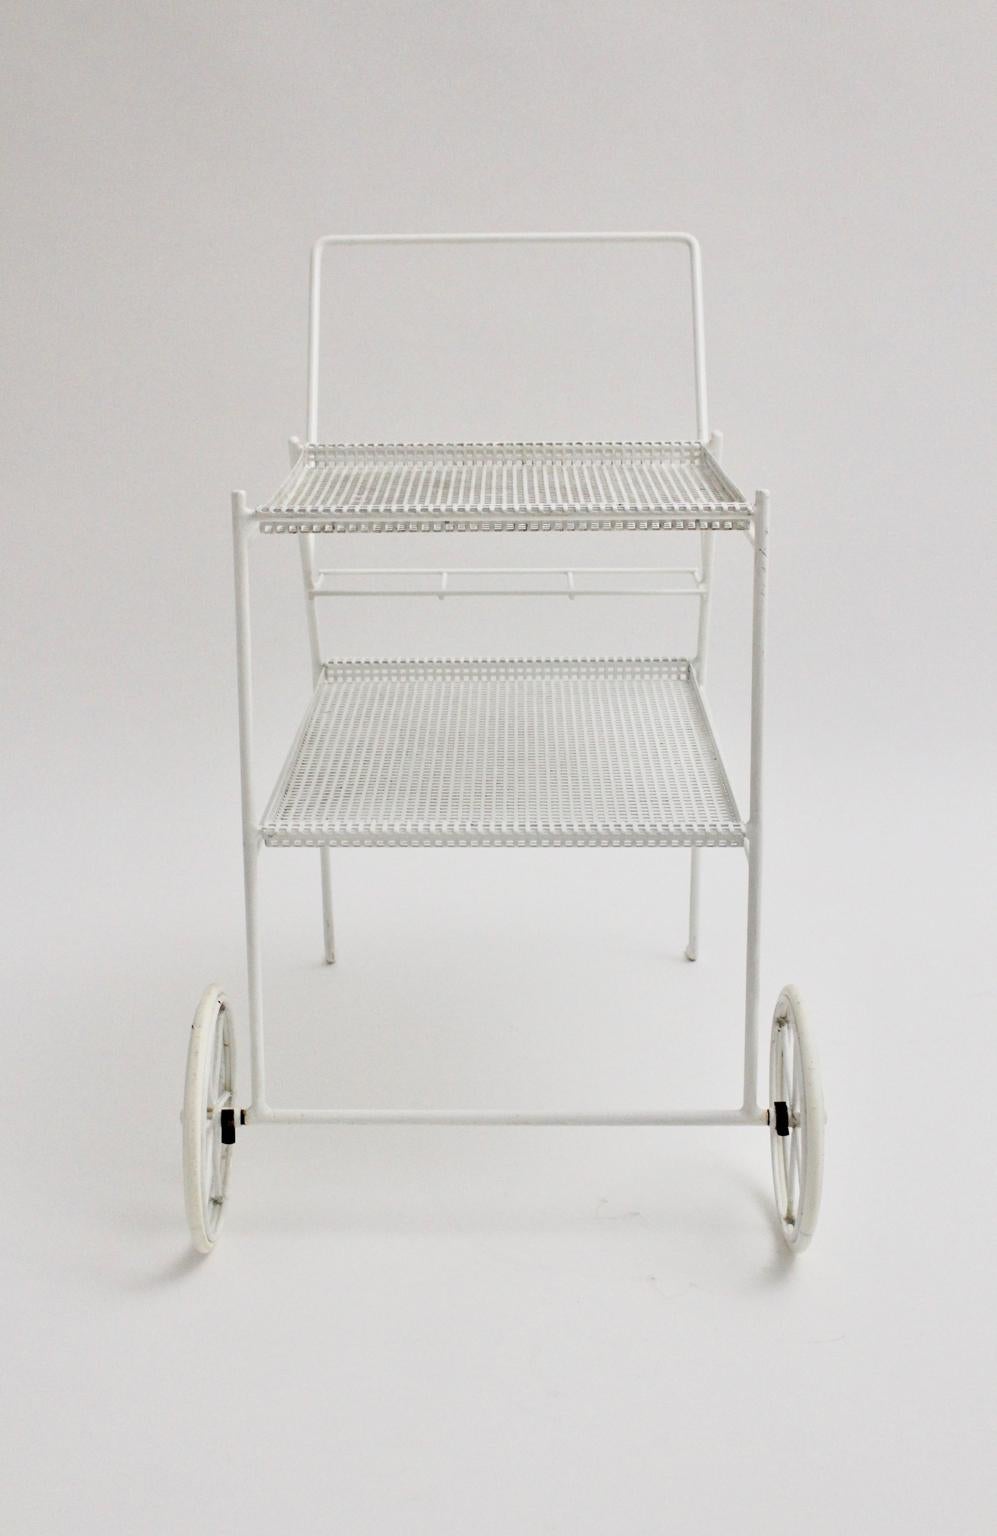 This two tiered bar cart in the style of Mathieu Mategot, circa 1960 consists of wire steel, perforated white coated sheet metal and two wheels covered with white rubber.
The two trays are removable and so very practical to serve drinks or